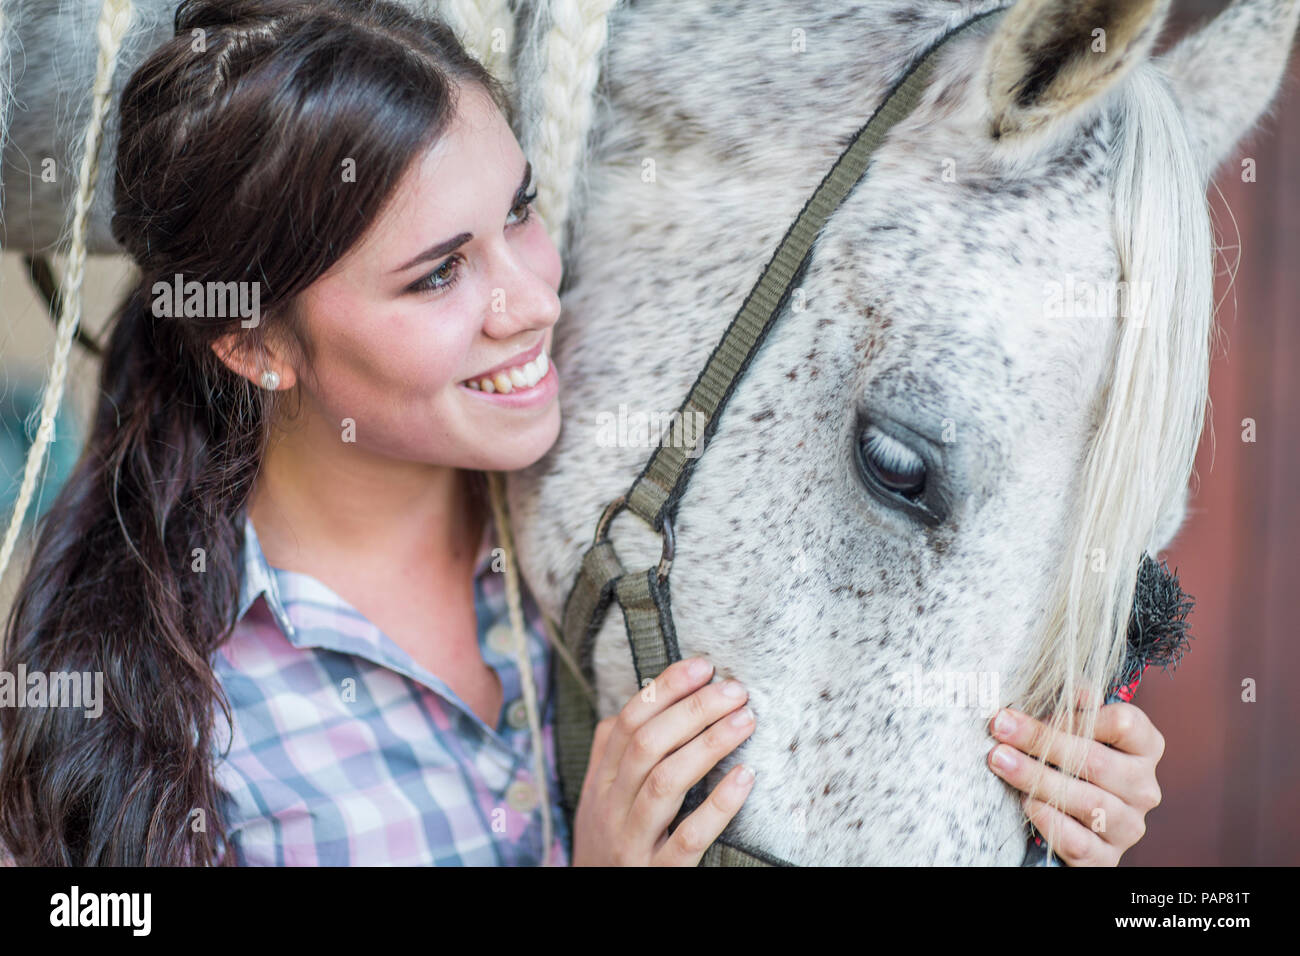 Smiling woman caring for a horse on a farm Stock Photo